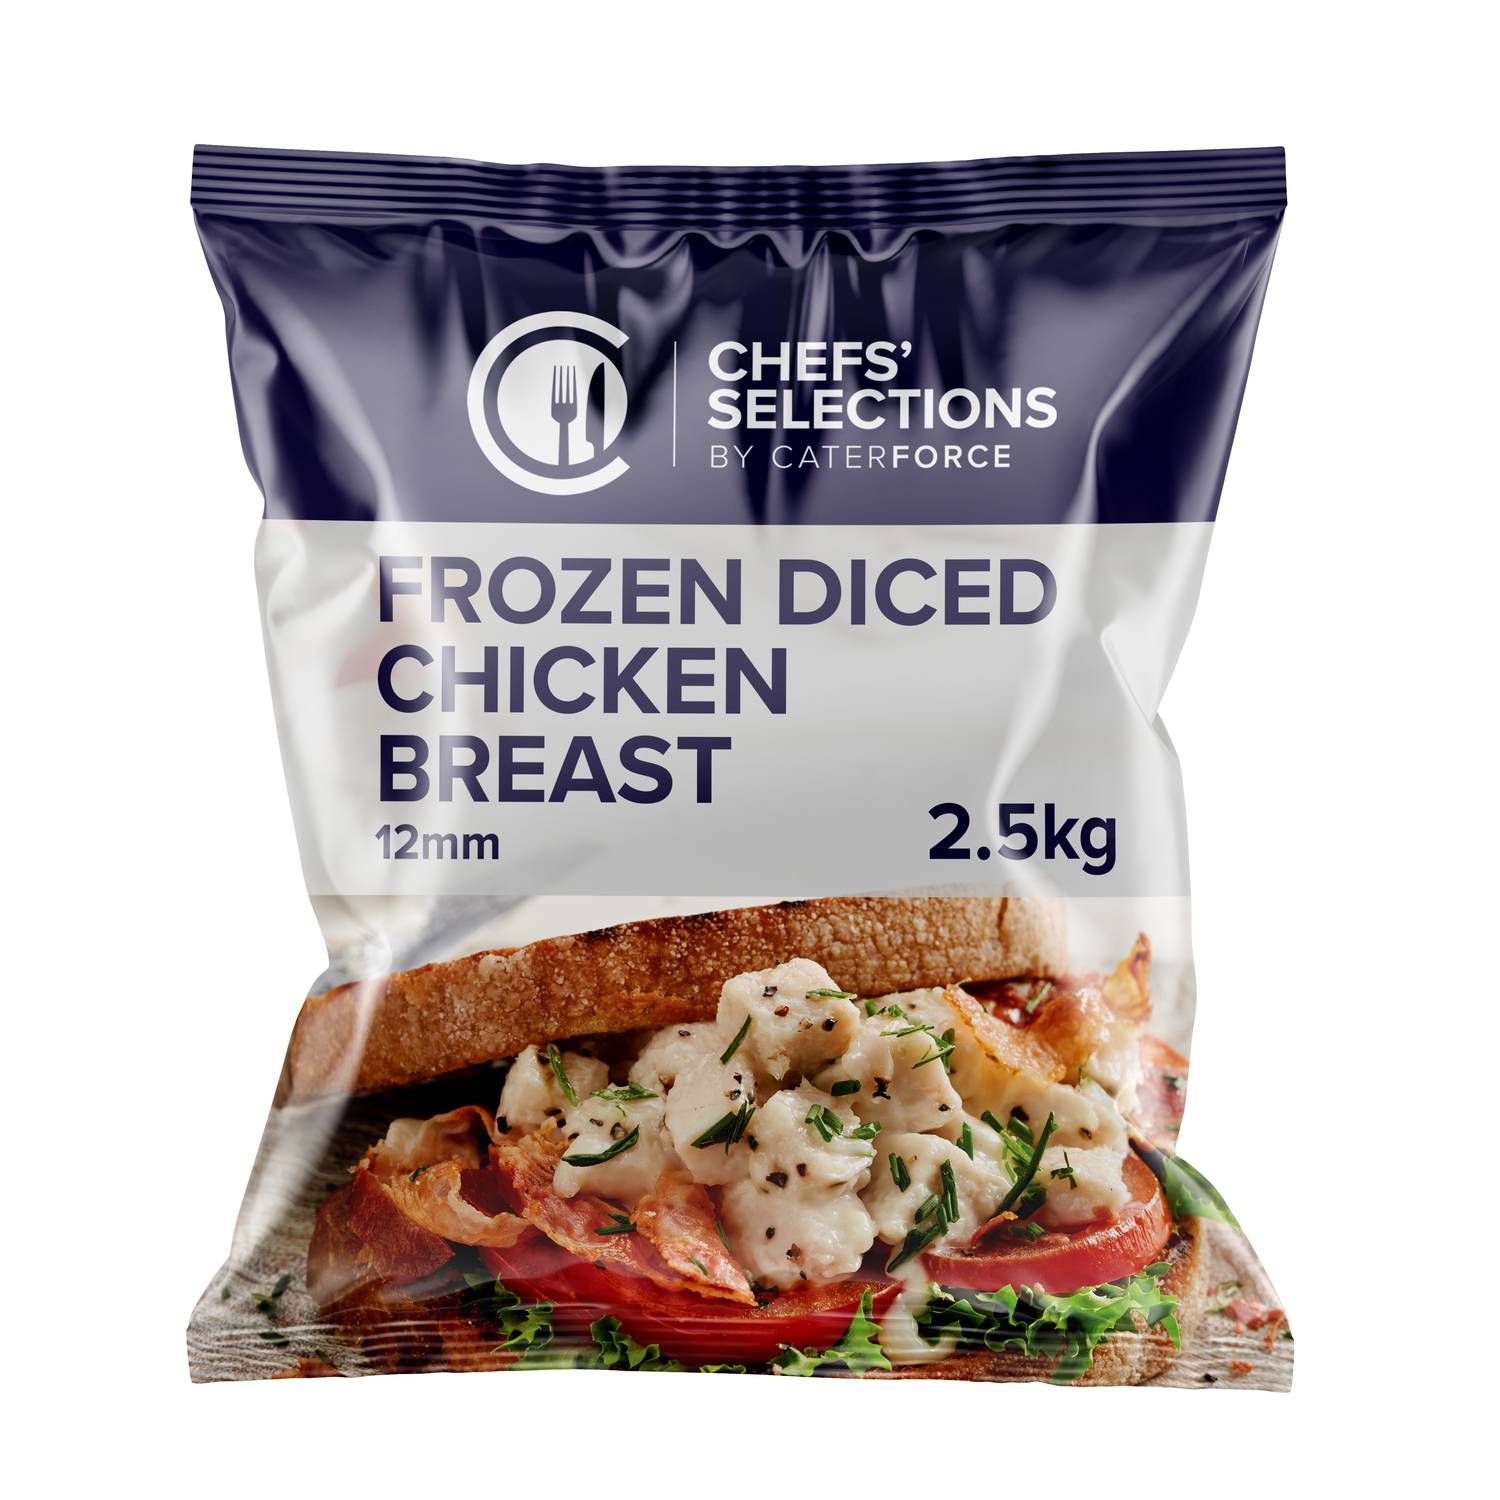 Chefs’ Selections Frozen Diced Chicken Breast 12mm (4 x 2.5kg)